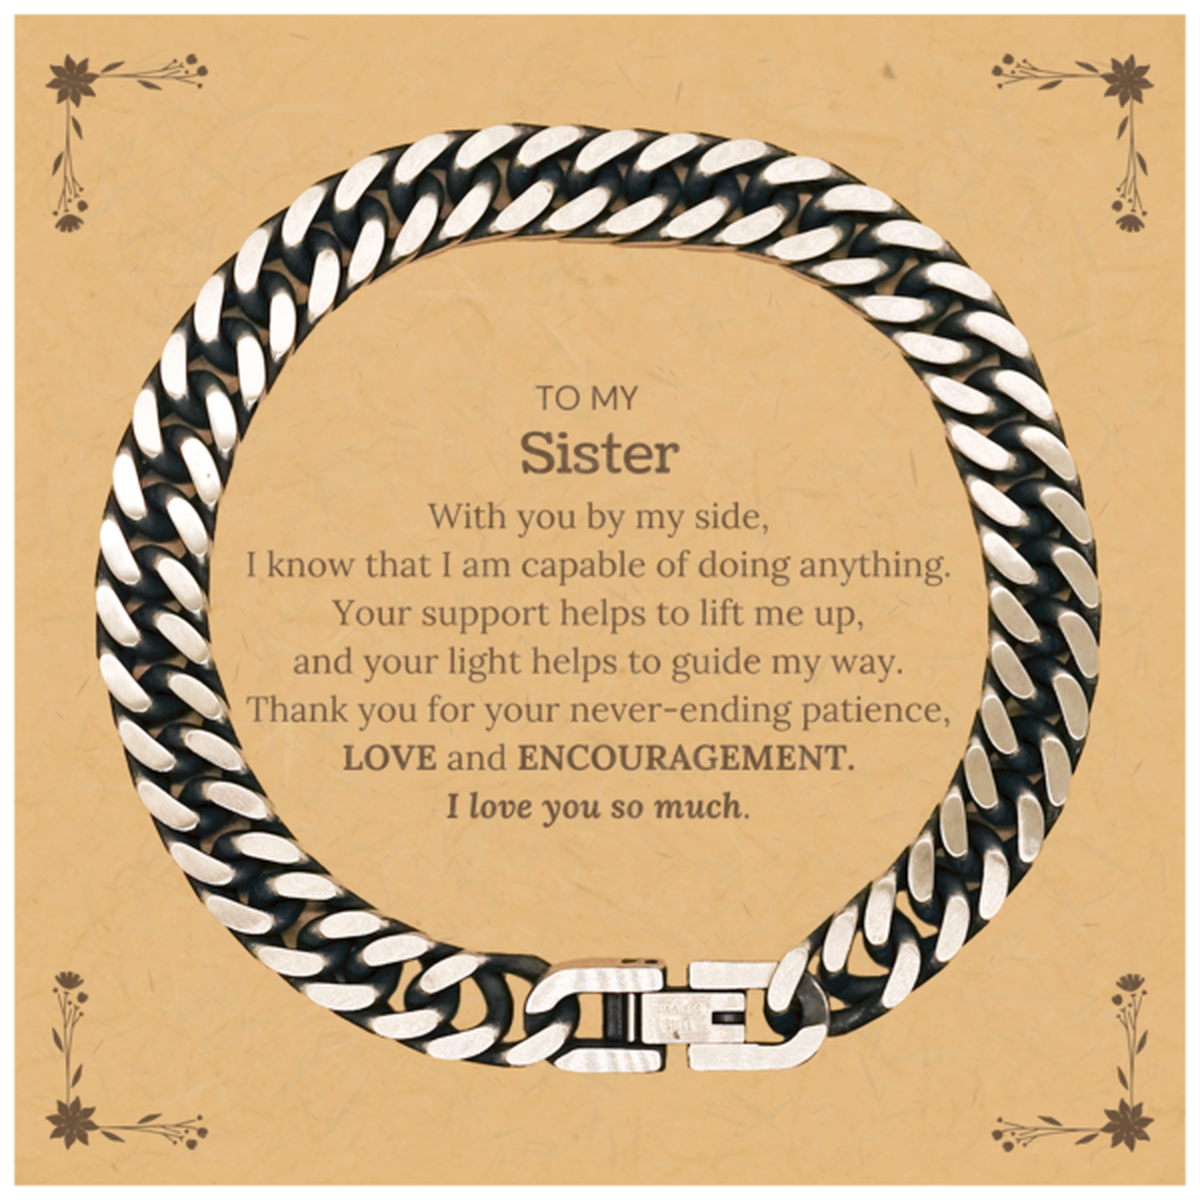 Appreciation Sister Cuban Link Chain Bracelet Gifts, To My Sister Birthday Christmas Wedding Keepsake Gifts for Sister With you by my side, I know that I am capable of doing anything. I love you so much